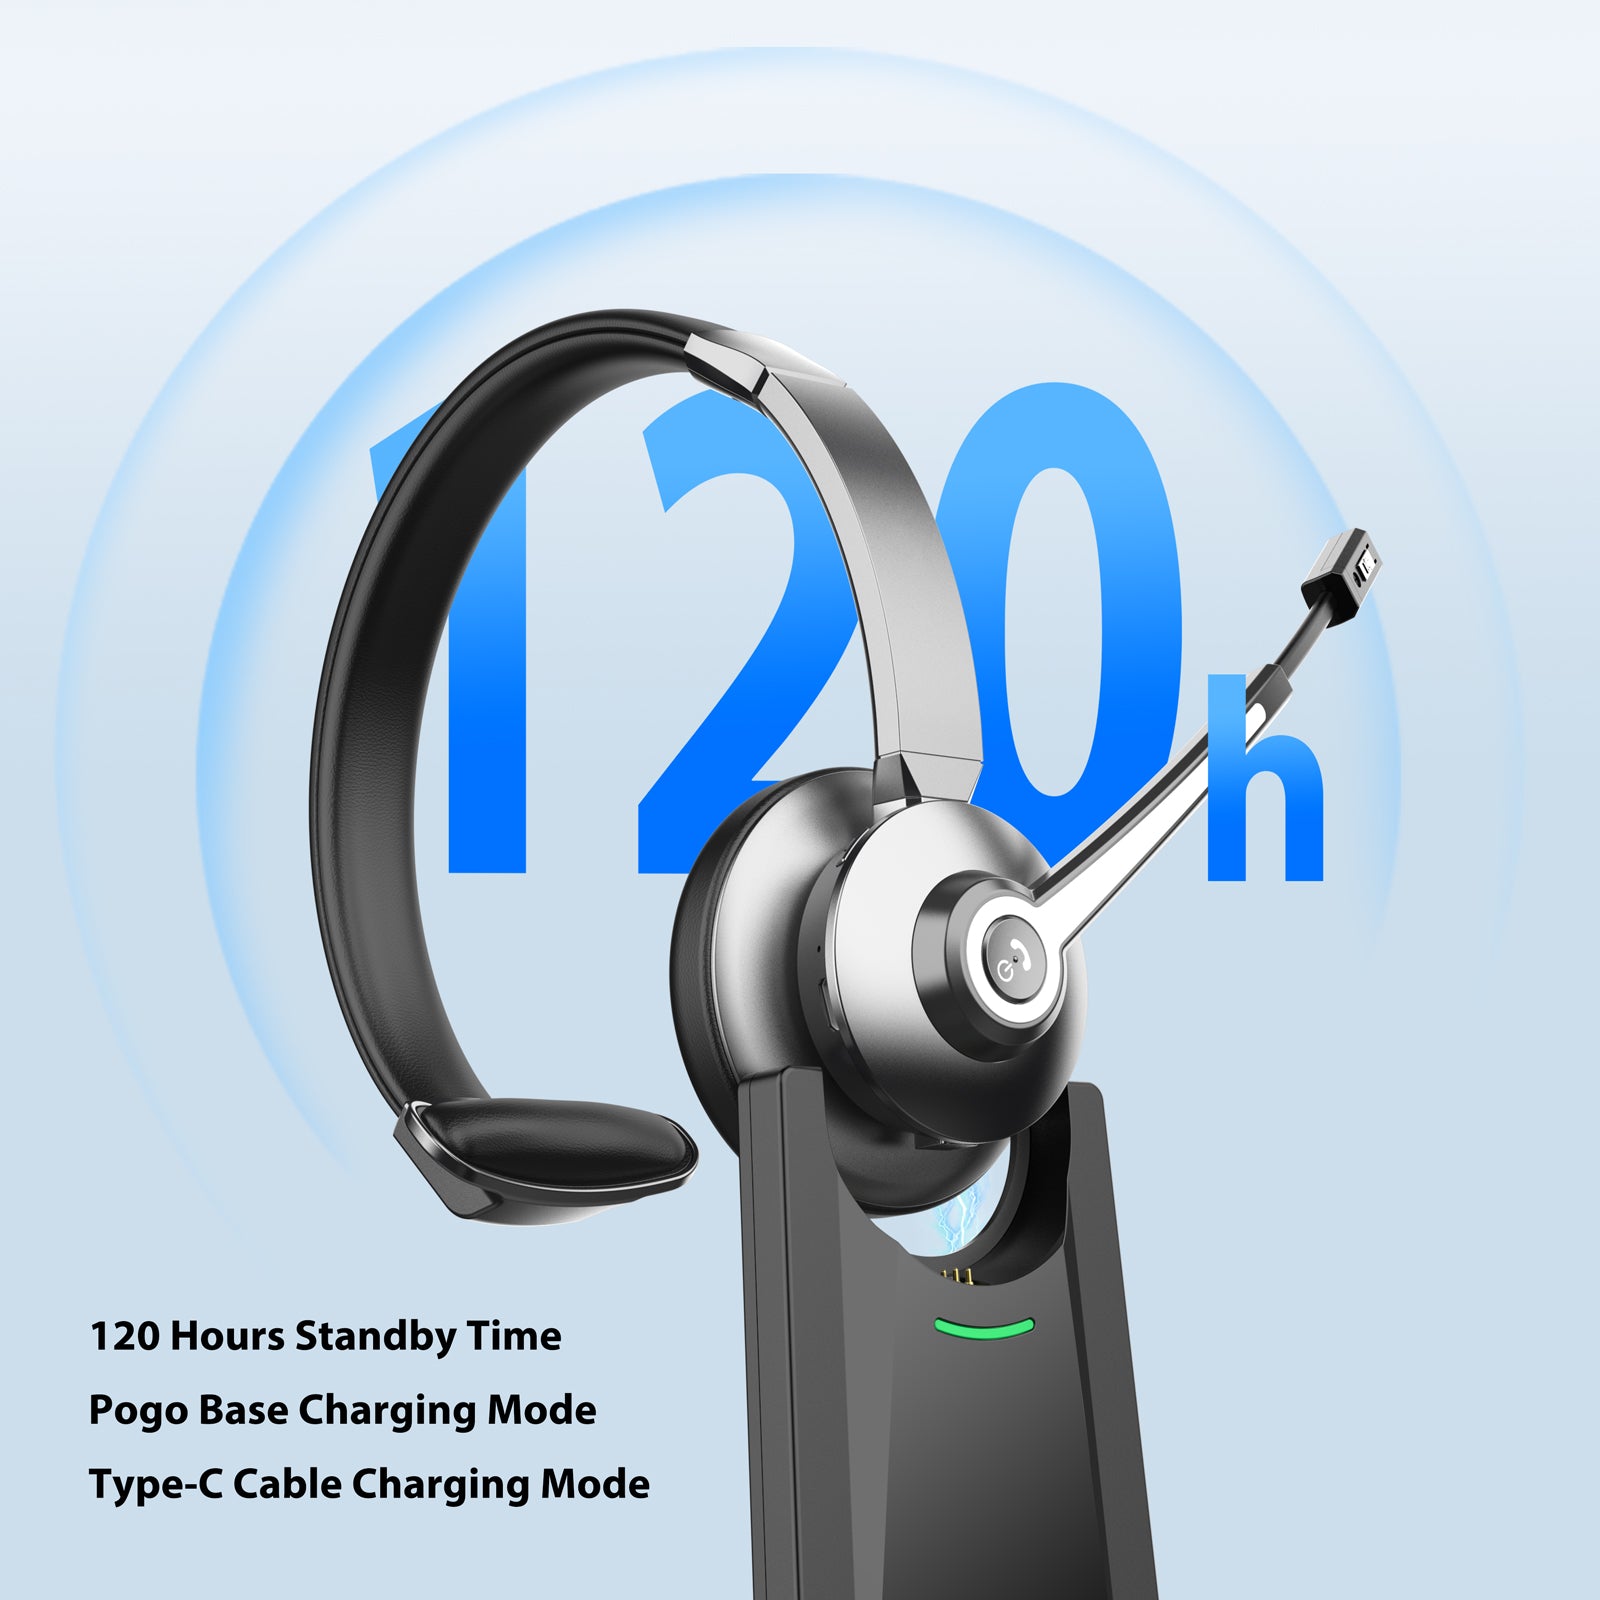 120 Hours standby time,Pogo base charging mode,Type-C cable charging mode.